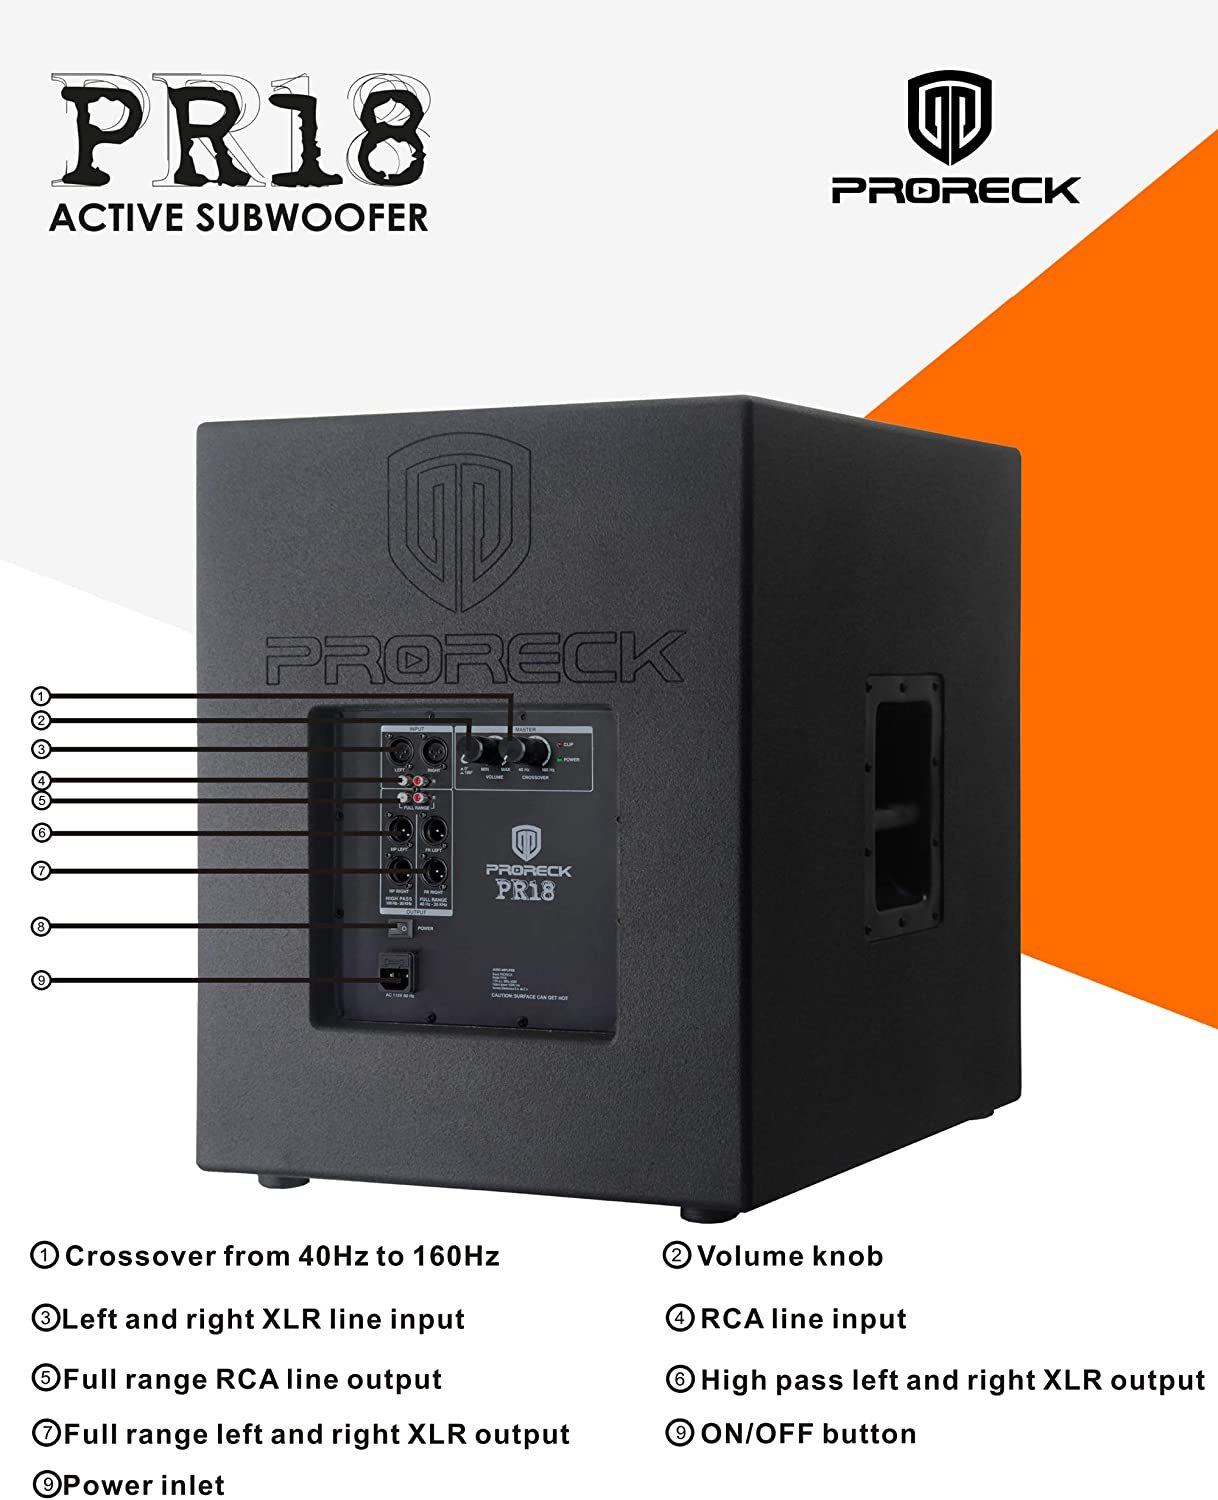 Select the Reliable and Affordable PRORECK DJ Subwoofer to Upgrade Your Sound Experience